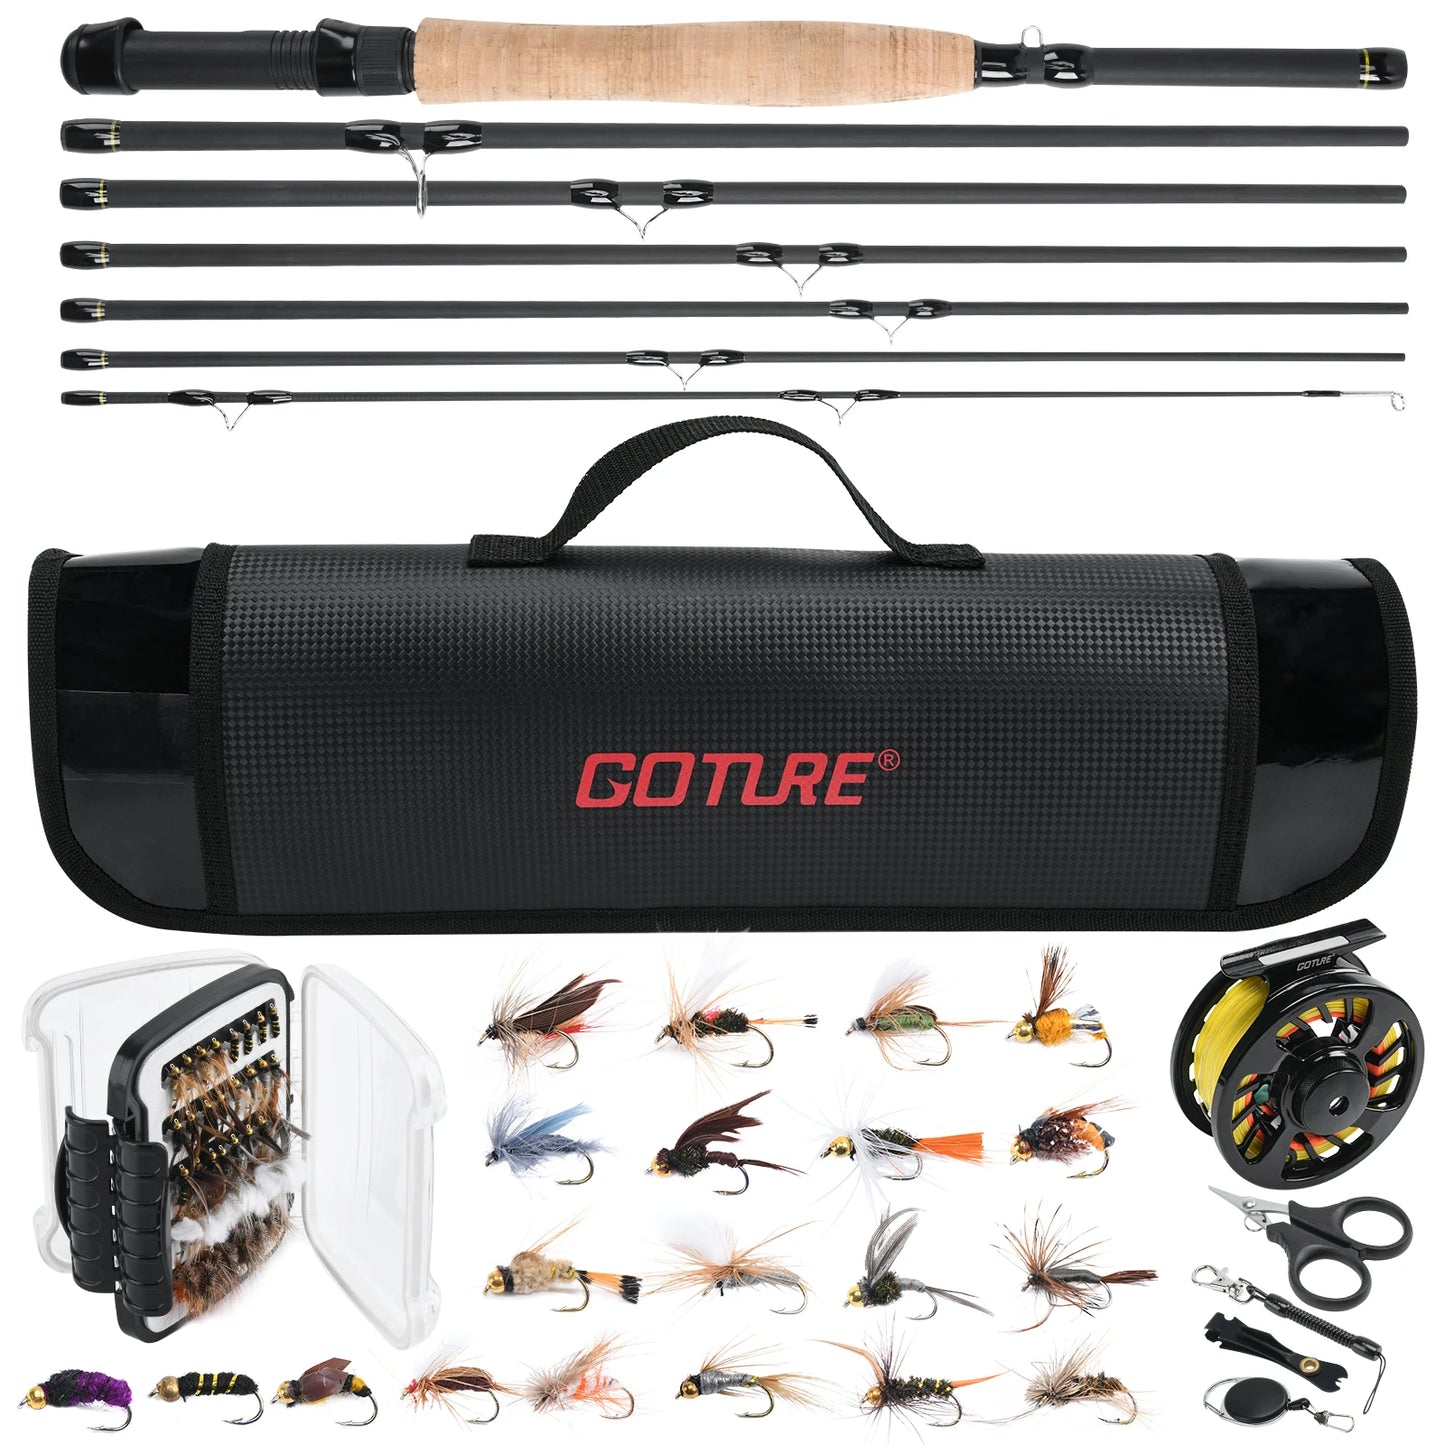 Goture 2.7m/9FT Fly Fishing Rod Set 5/6WT 8pcs Carbon Fiber Fly Rod Combo Portable Travel Feeder with Reel Fishing Tackle Bag